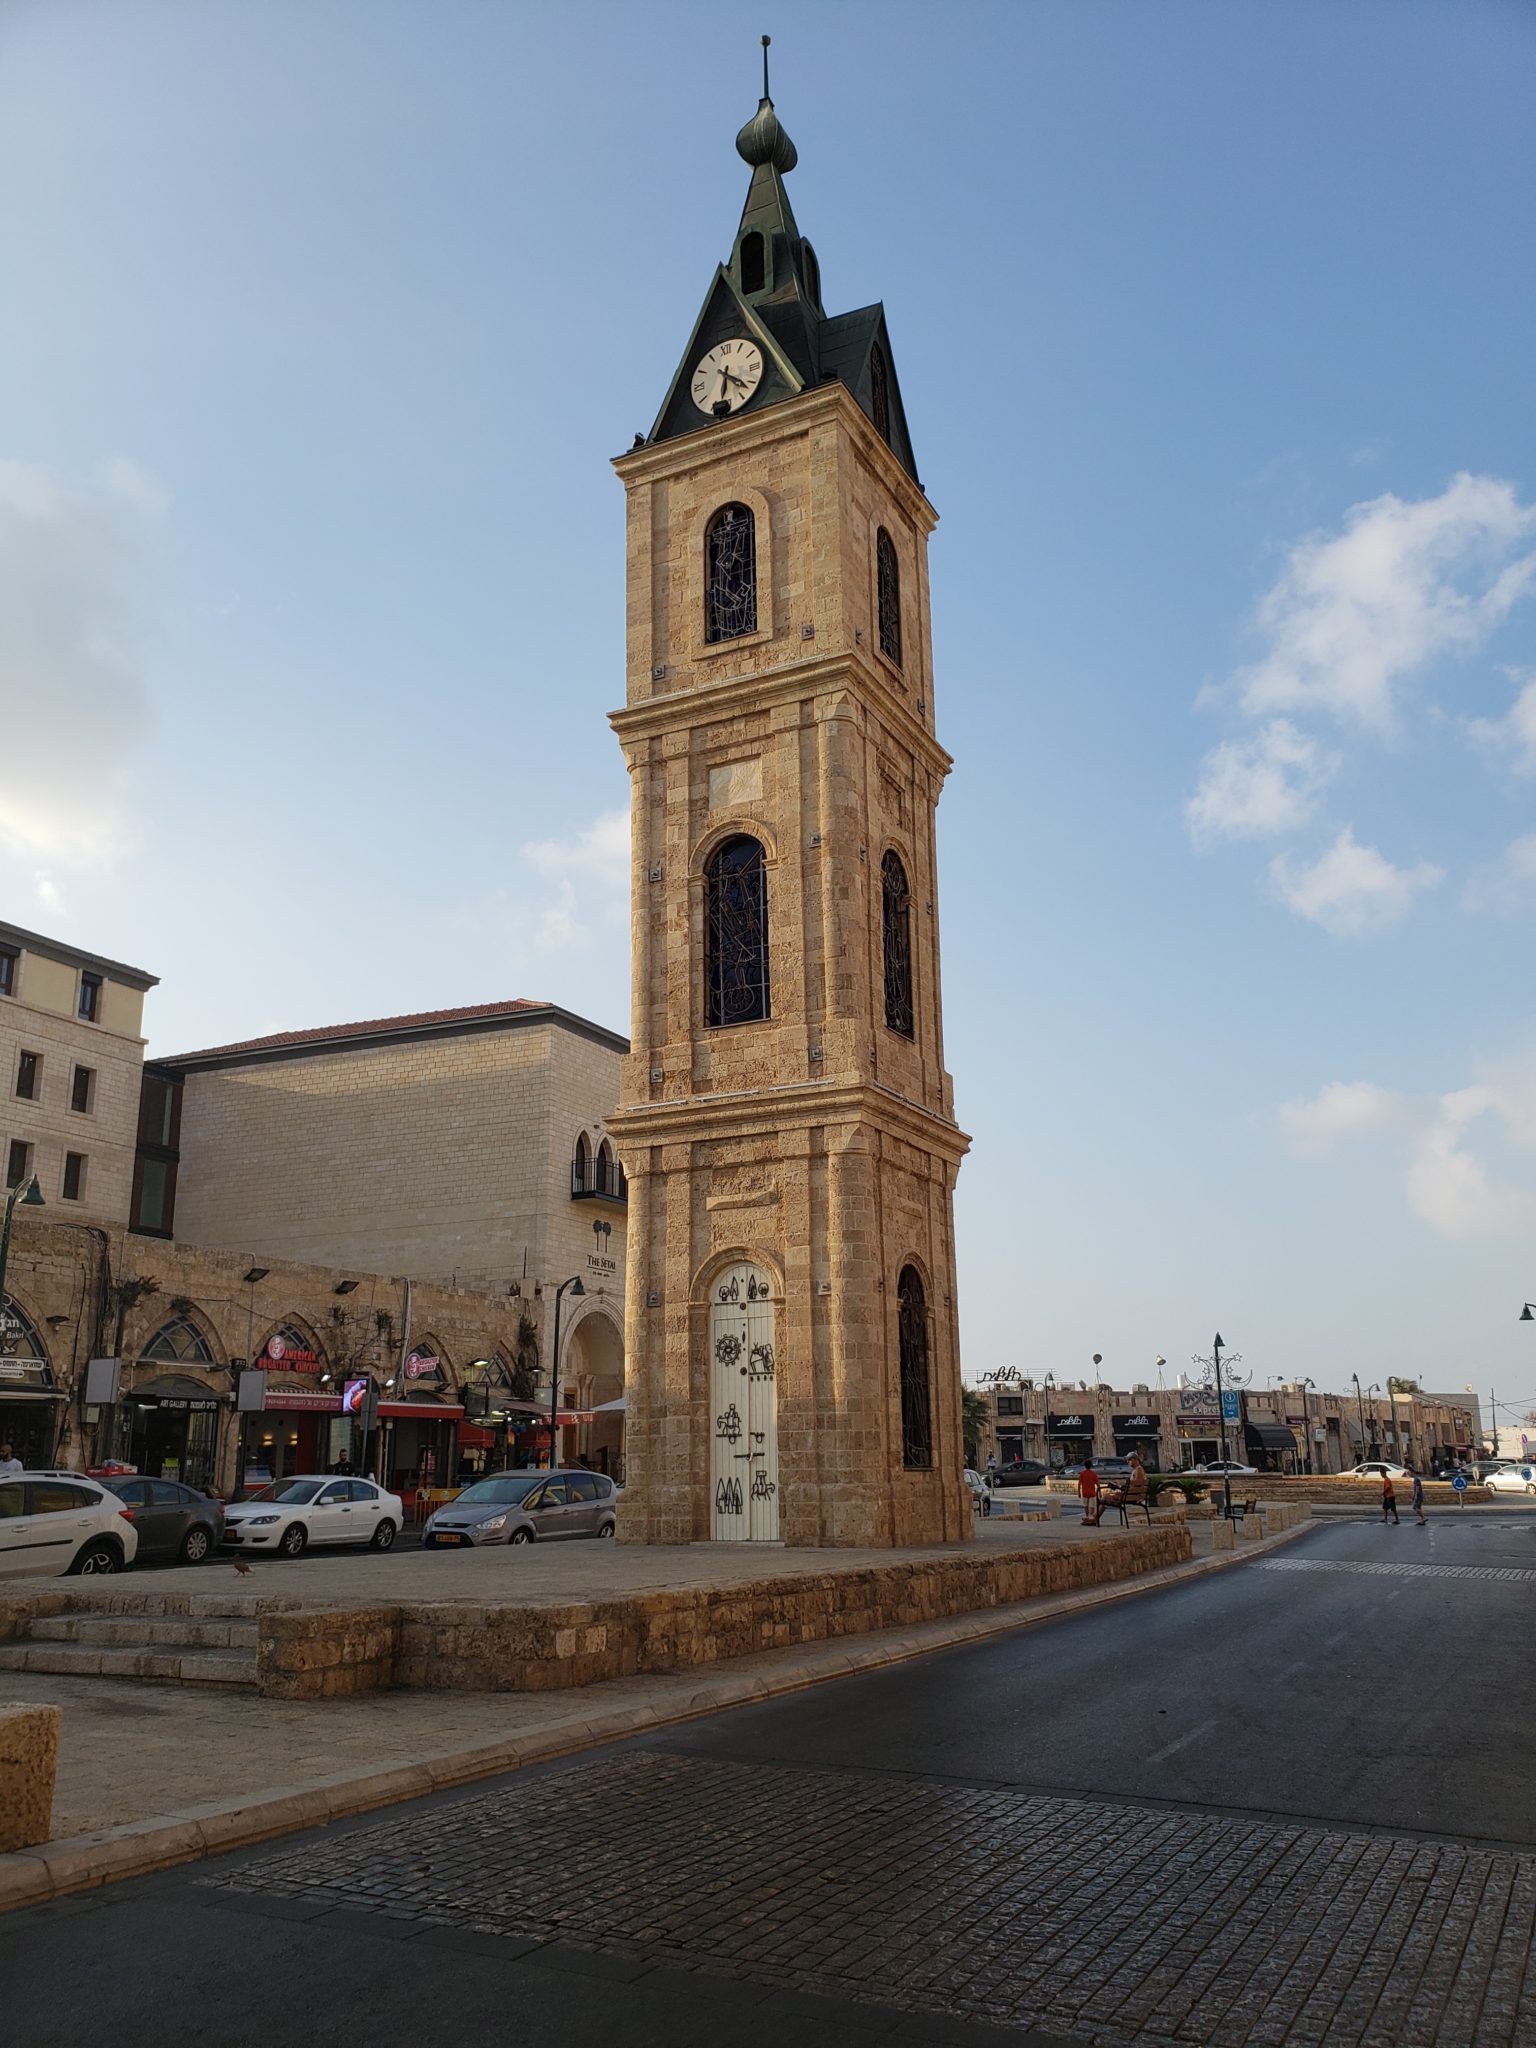 a clock tower on a street